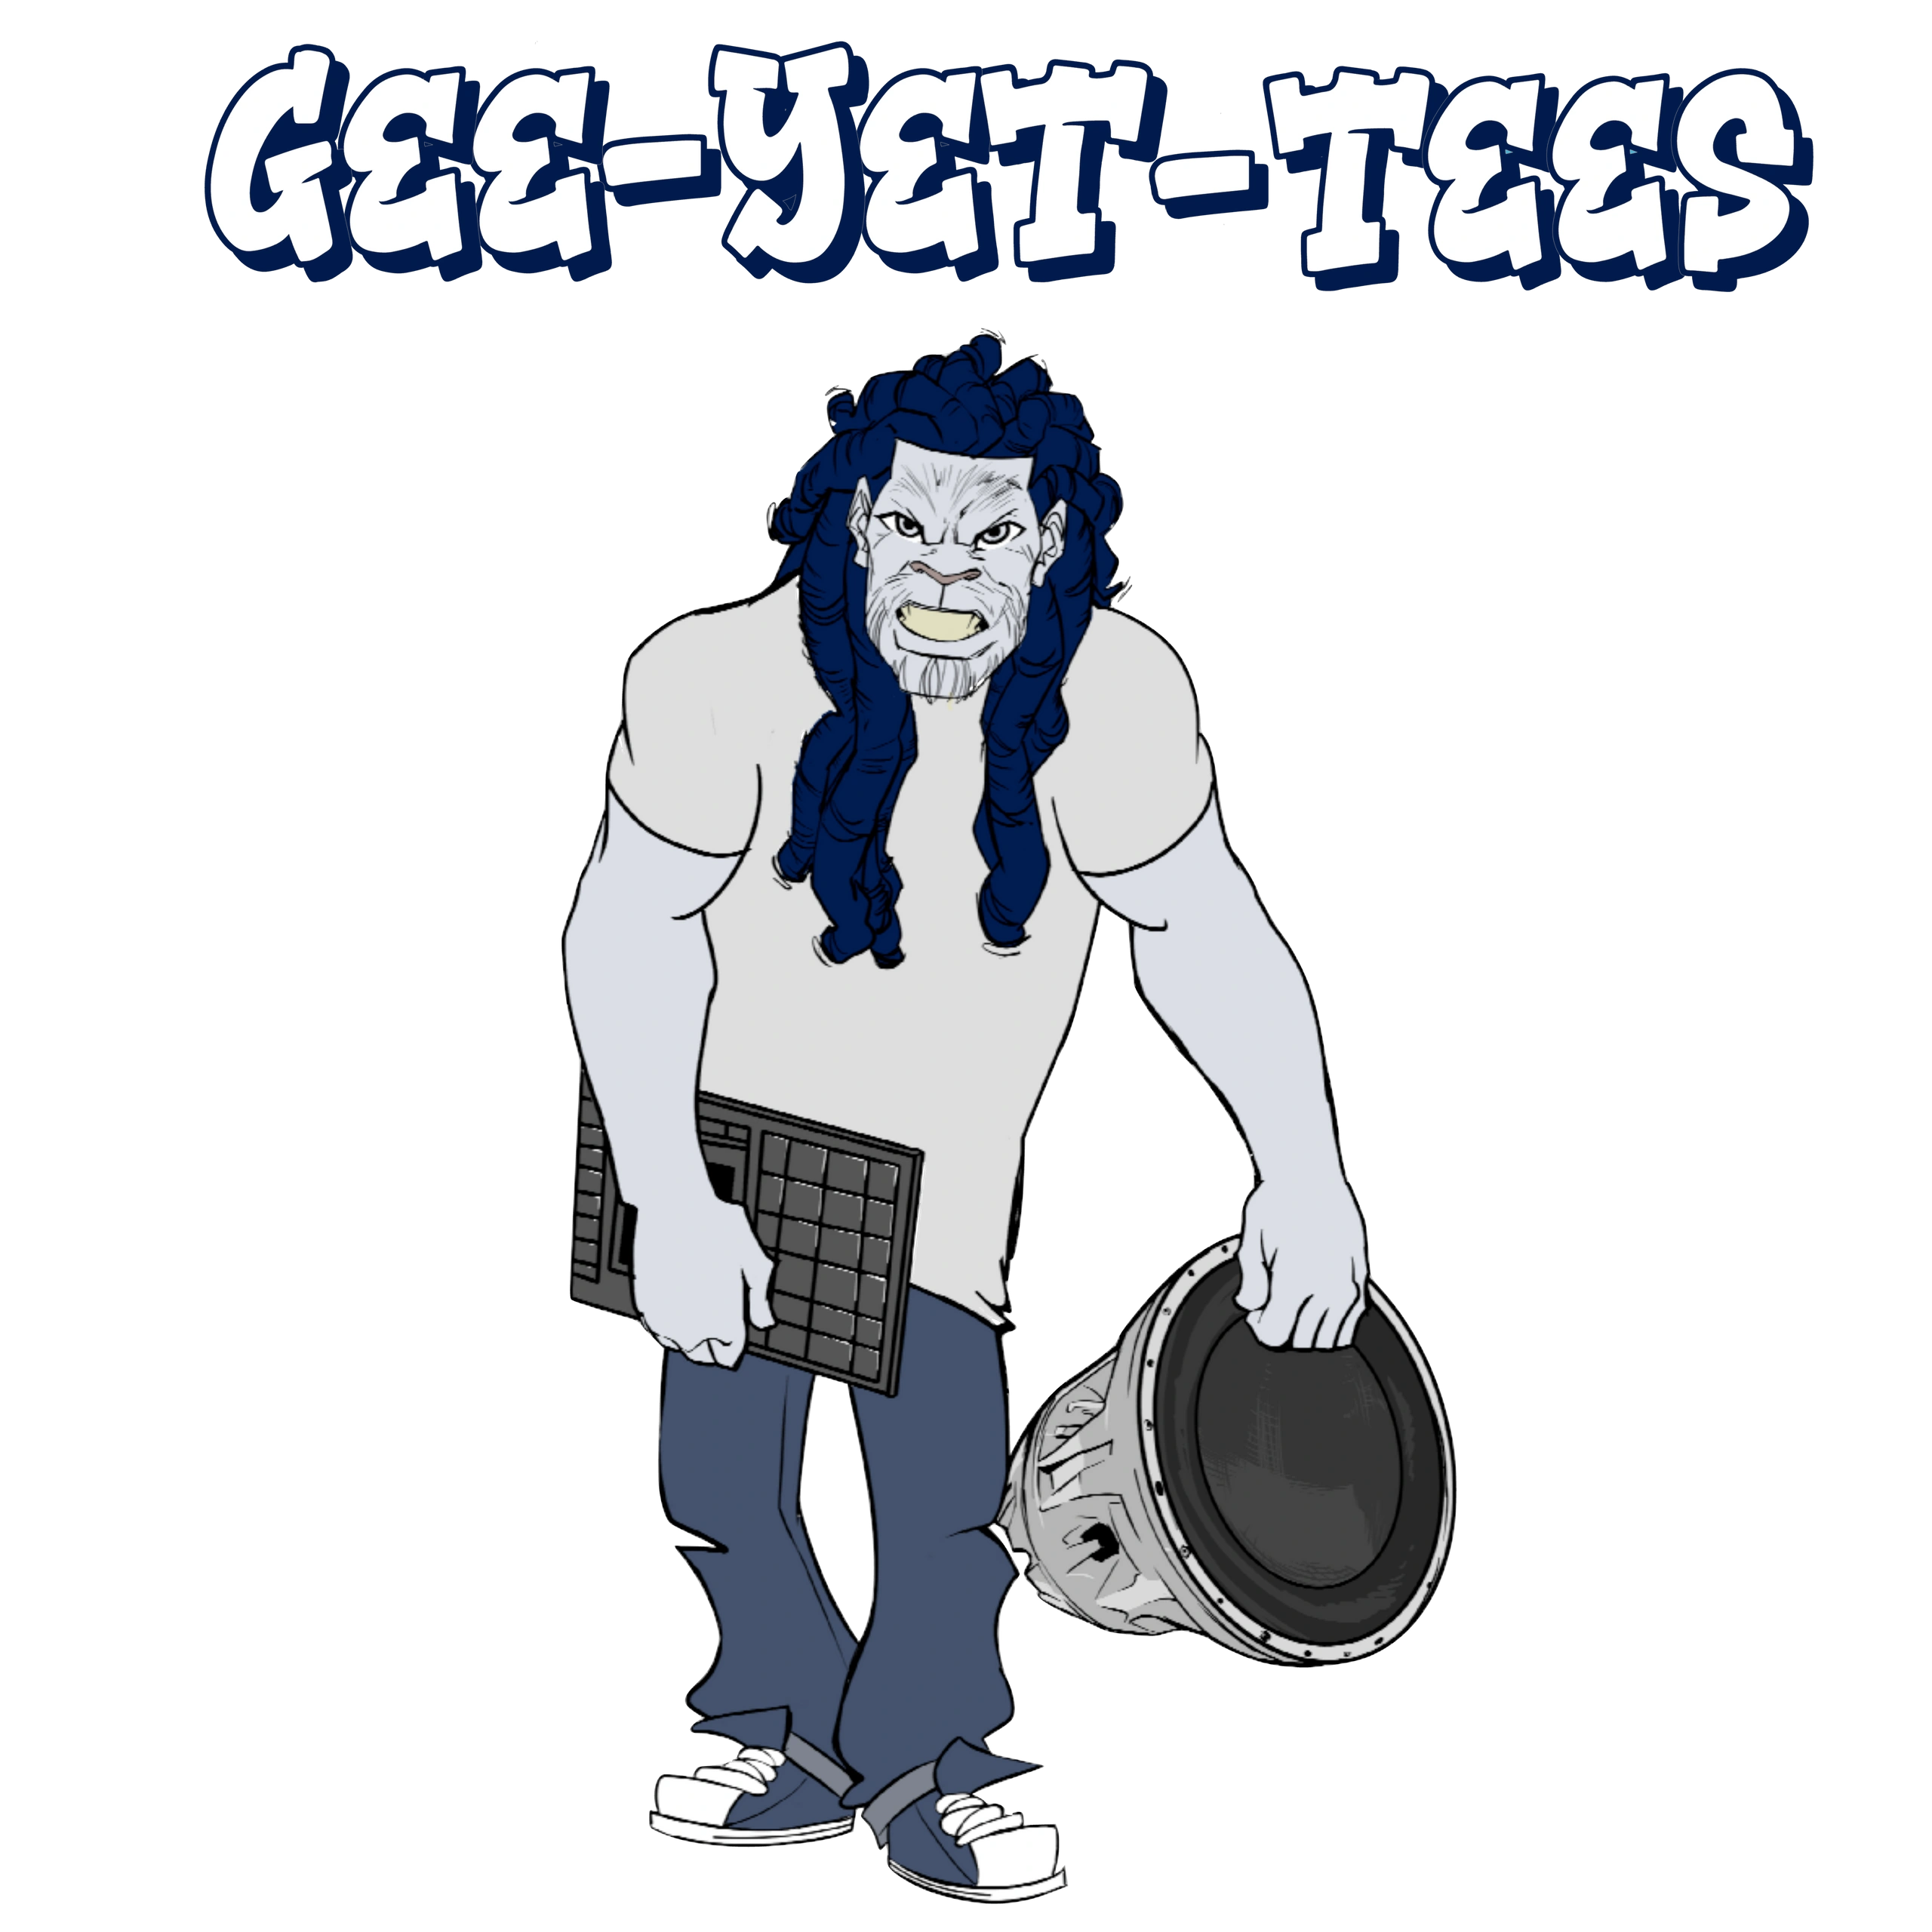 Gee Yet Tees - Group Shirts, Family Reunion Shirts, Graphic Tees